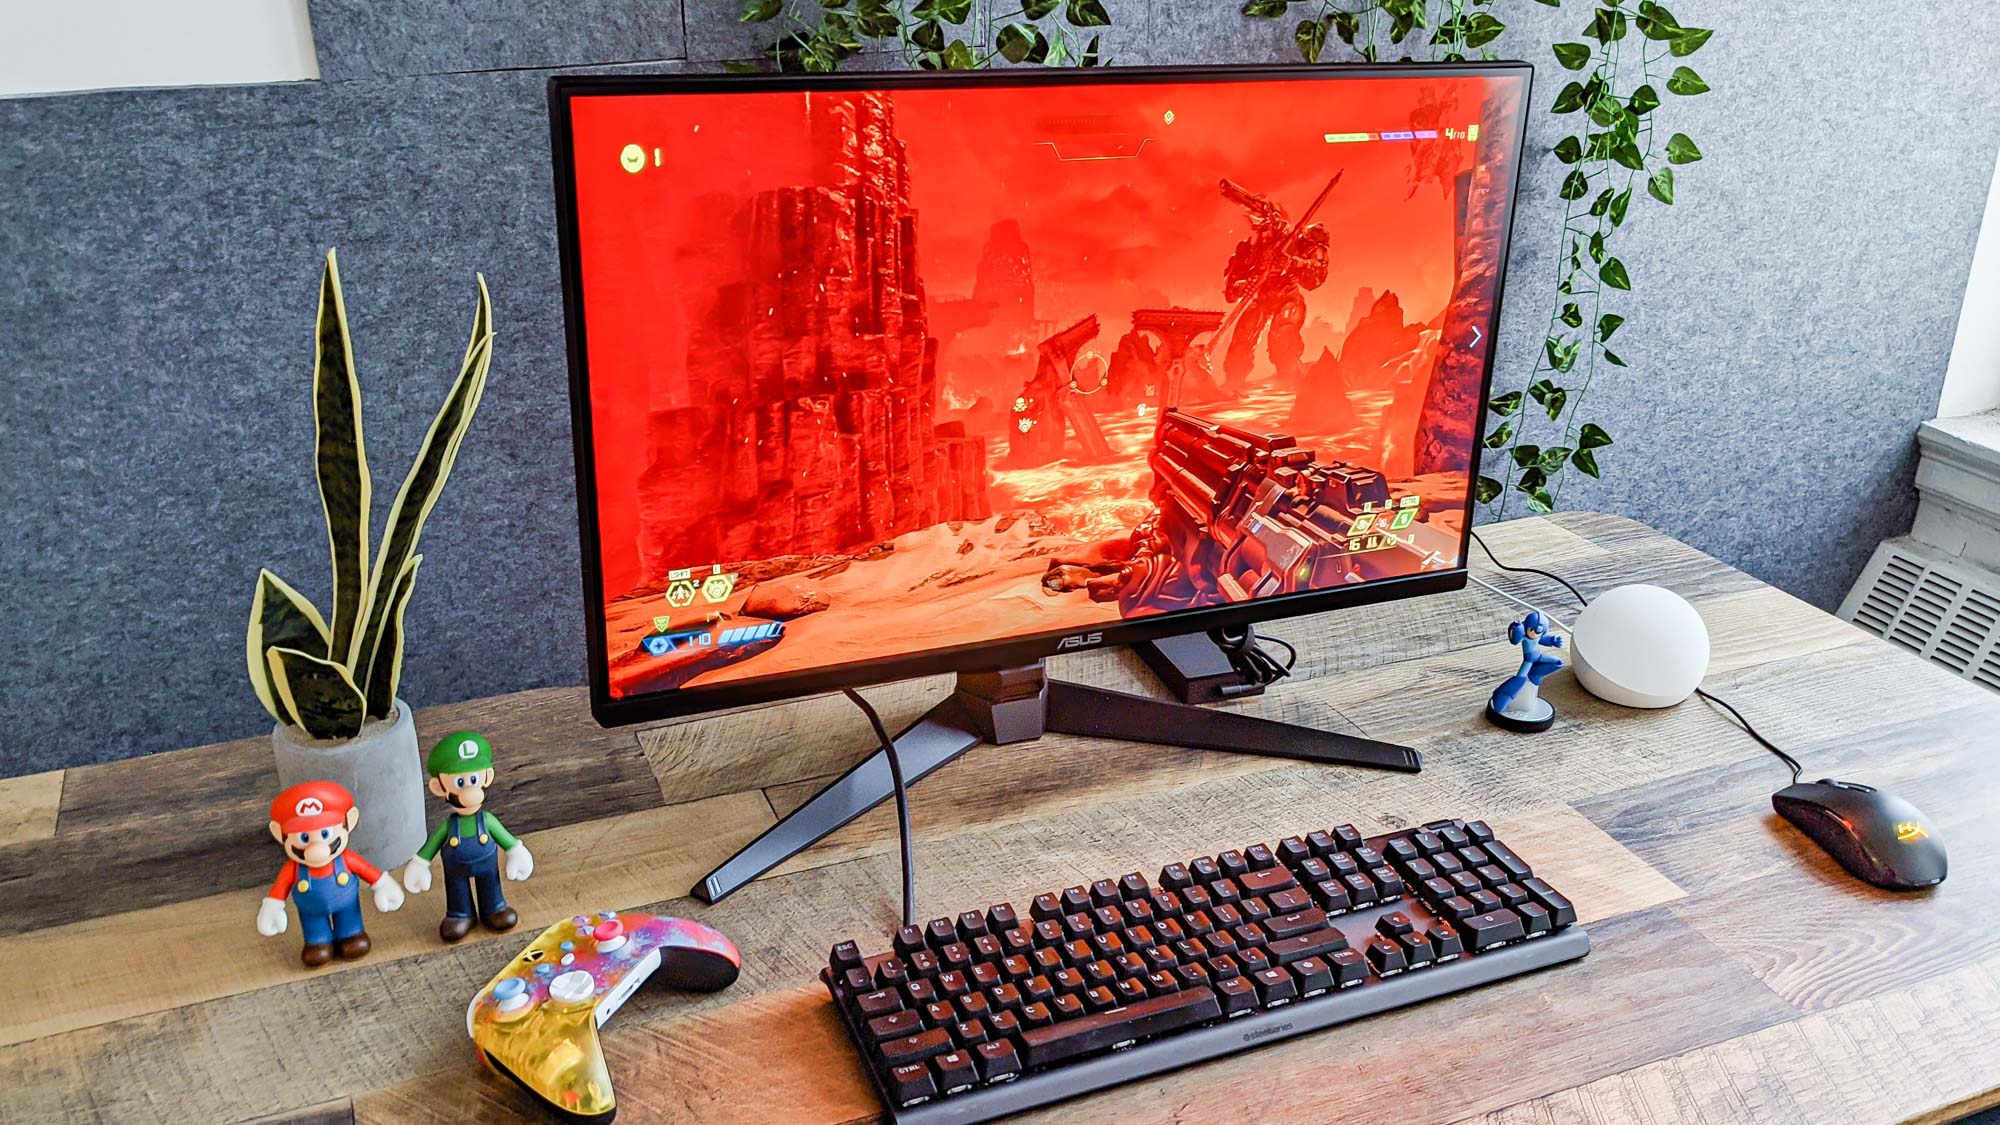 Asus TUF VG28UQL1A monitor review: Crystal-clear 4K with ample ports